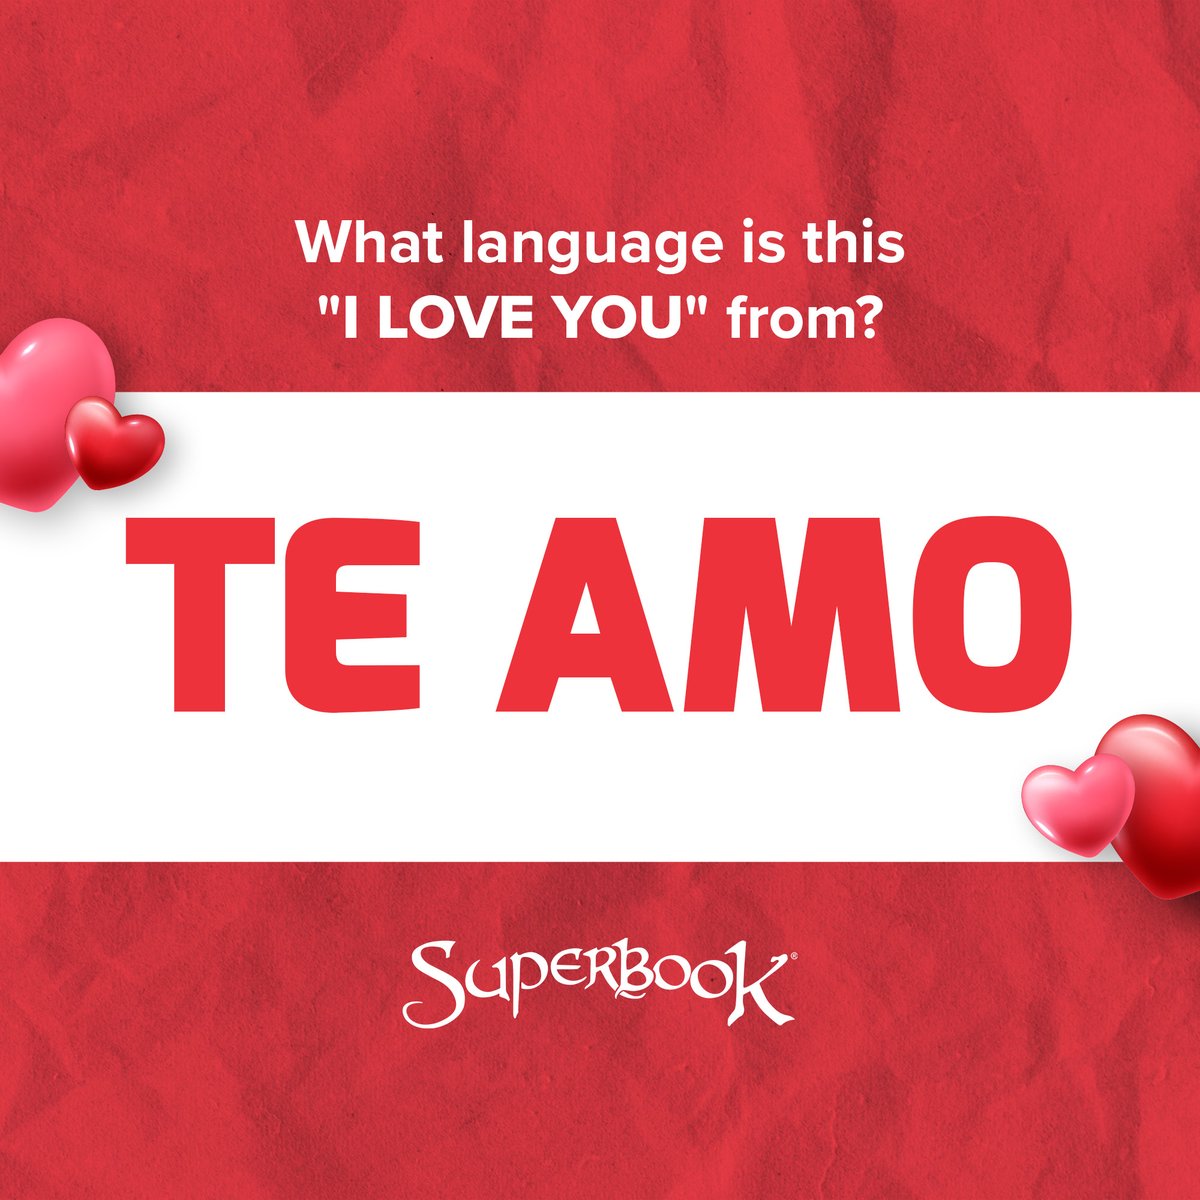 Love is a universal language! Do you know the correct answer to our #GuessTheLanguage game? ❤️ #HappyValentinesDay #TwitterGames